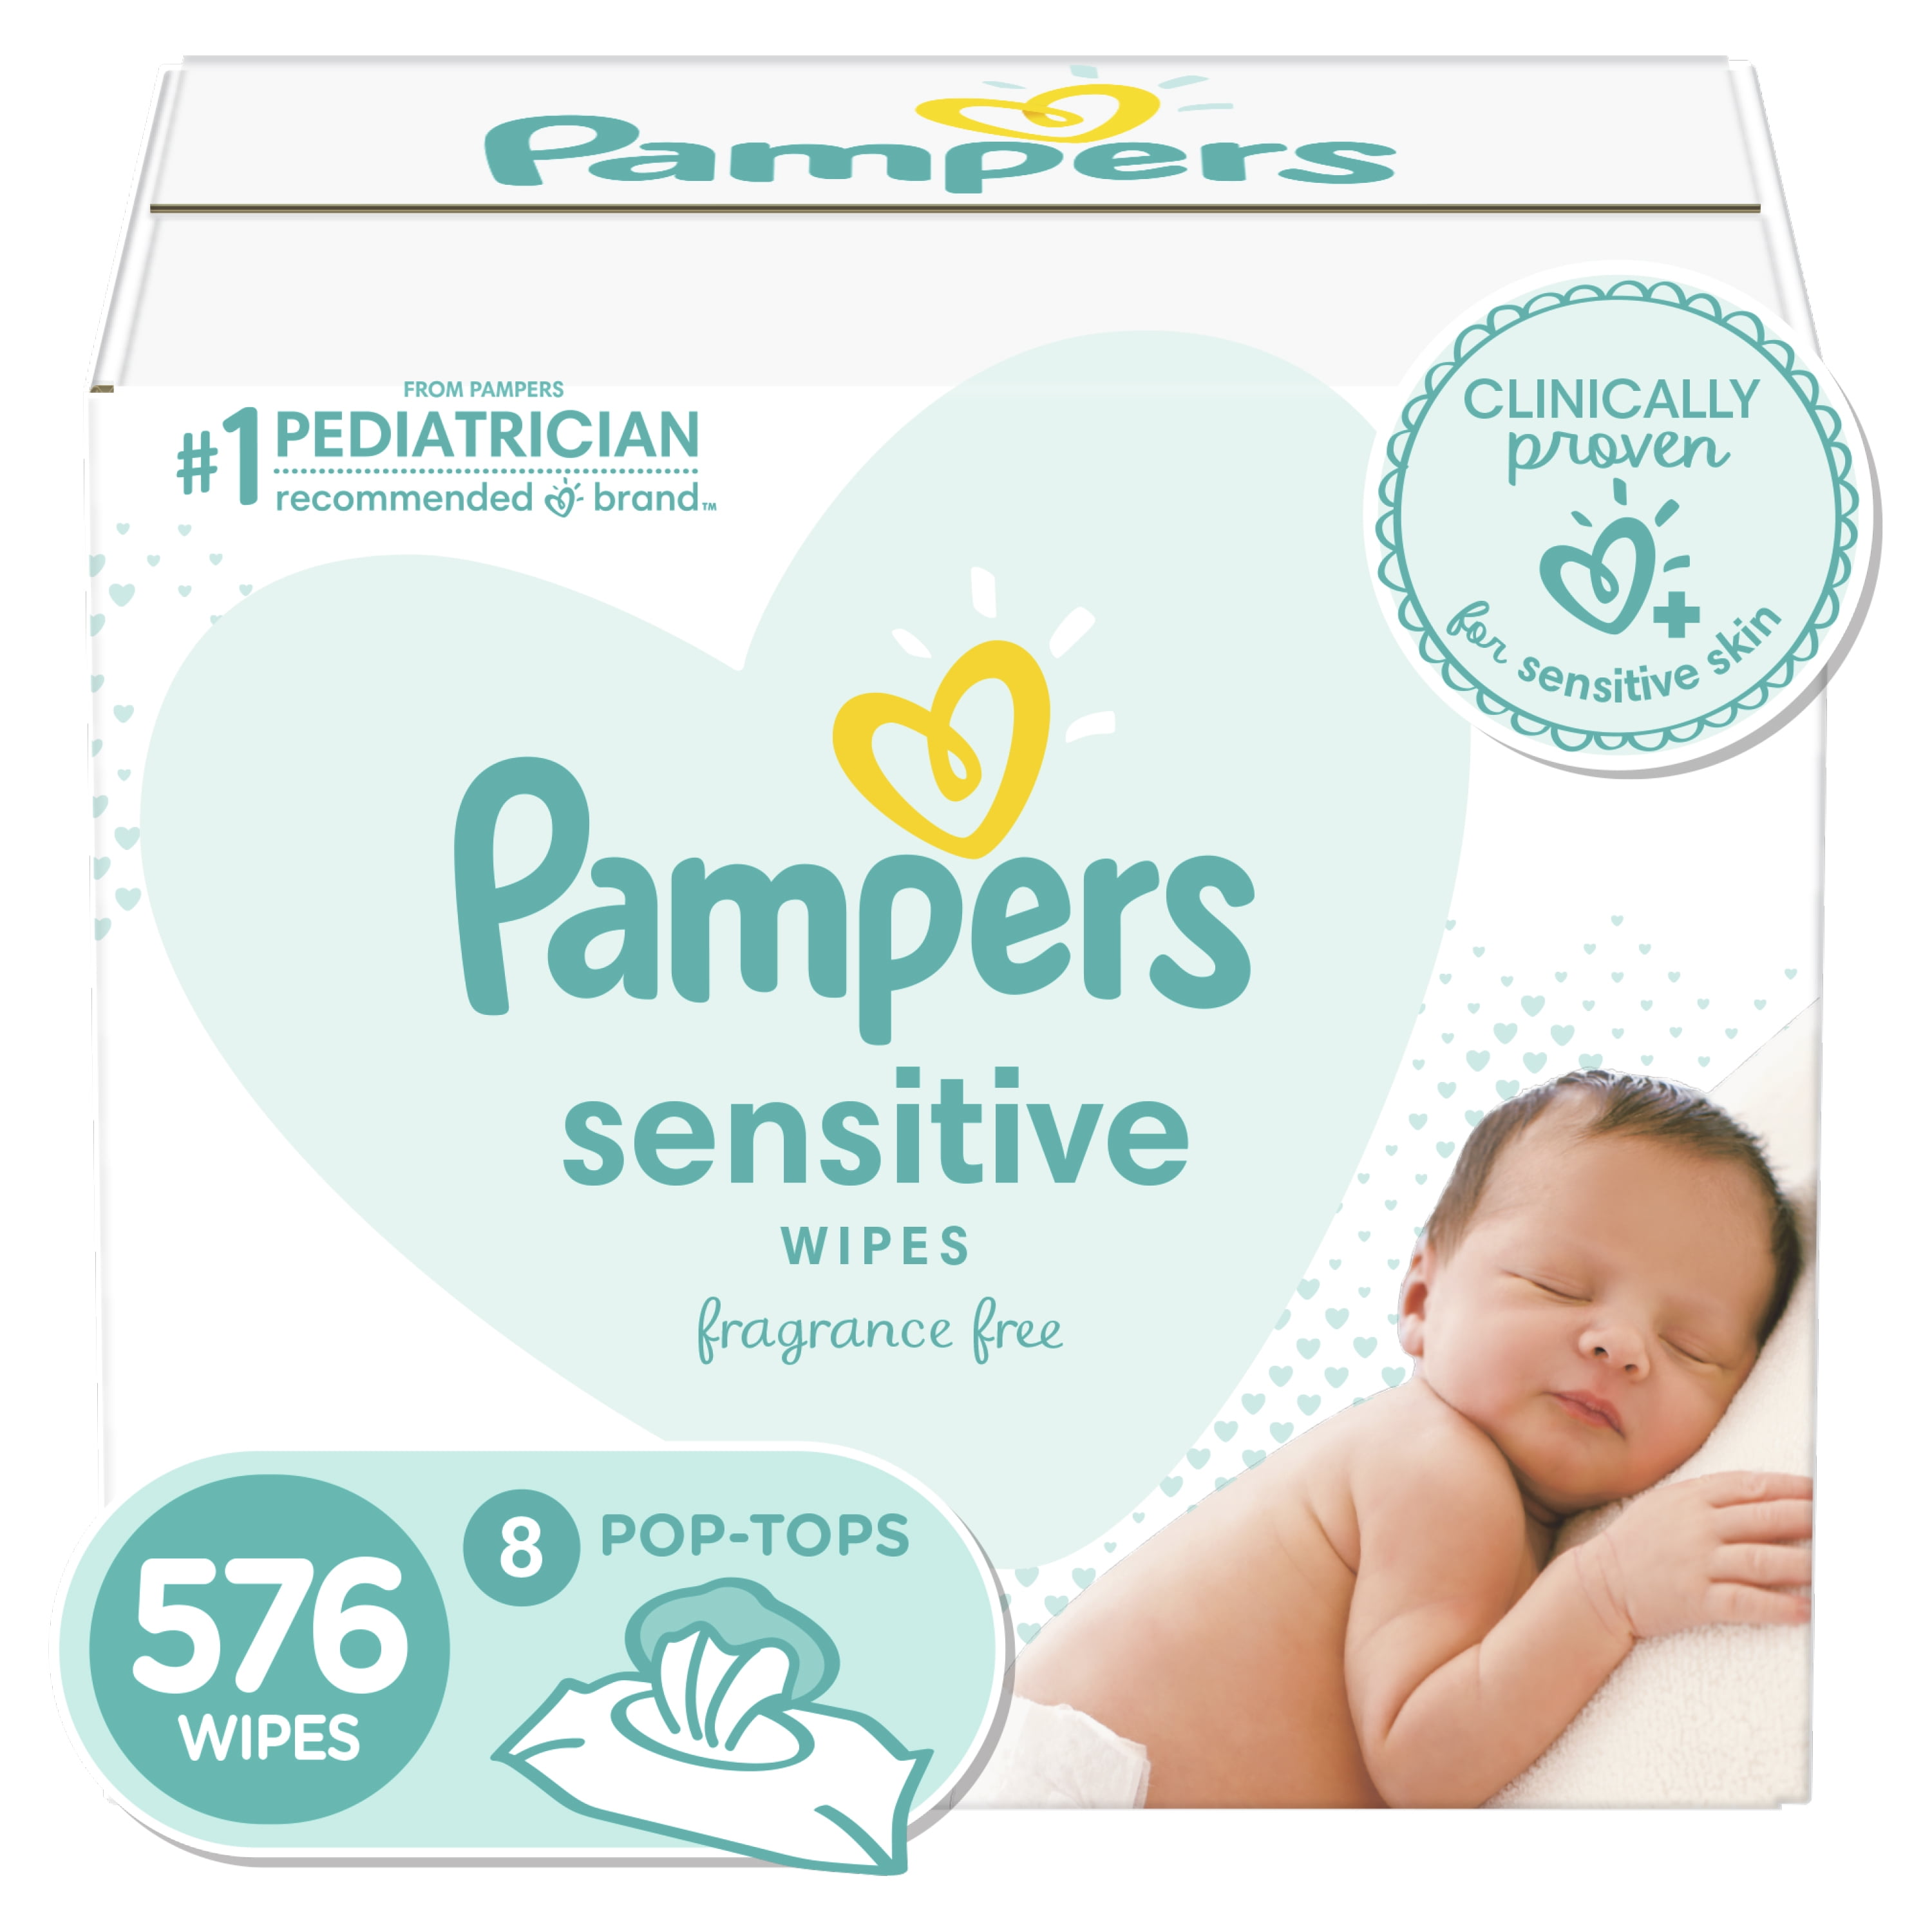 624 wipes PAMPERS Sensitive fragrance free BABY WIPES 12 packs x 52 wipes 